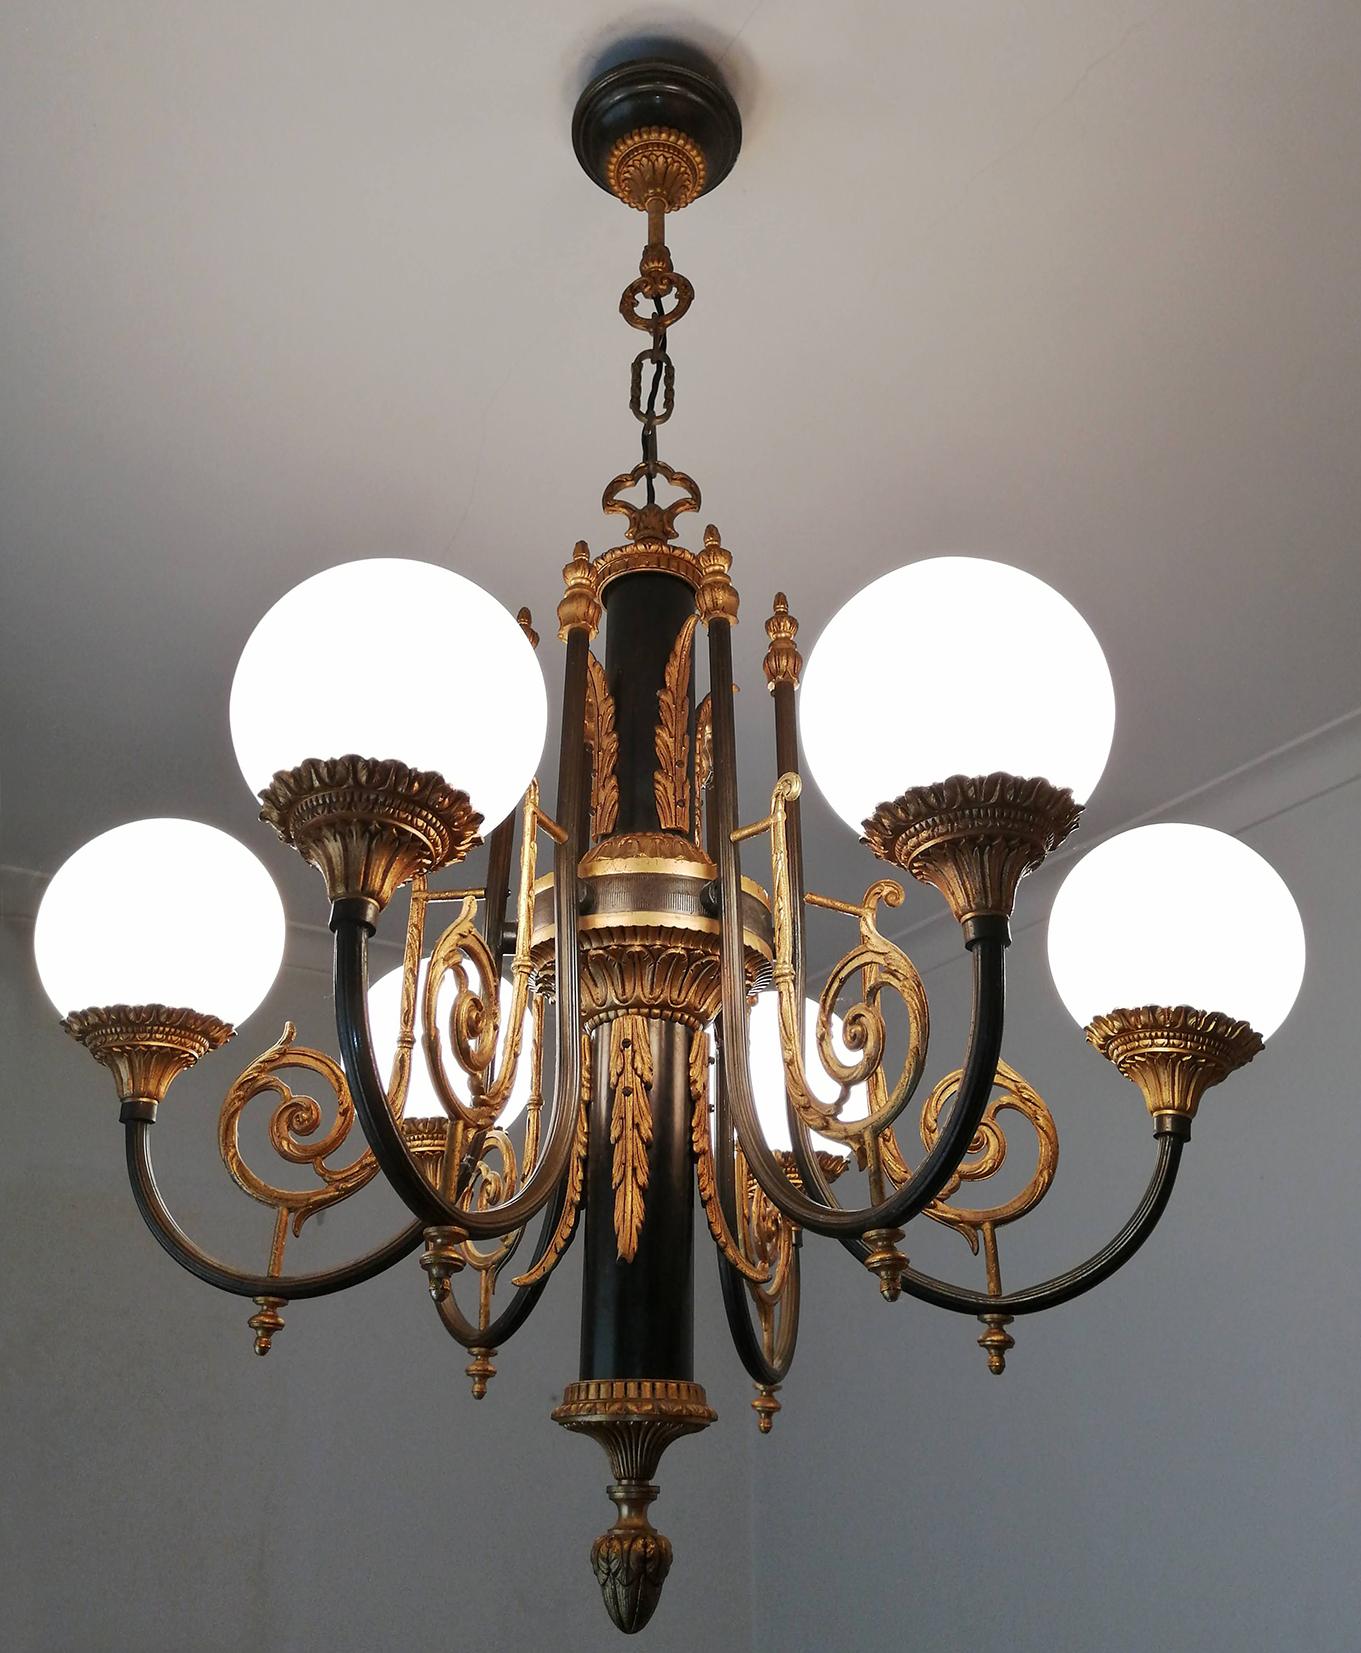 Antique French Empire Neoclassical Gilt & Patina Bronze Opaline Globe Chandelier For Sale 5